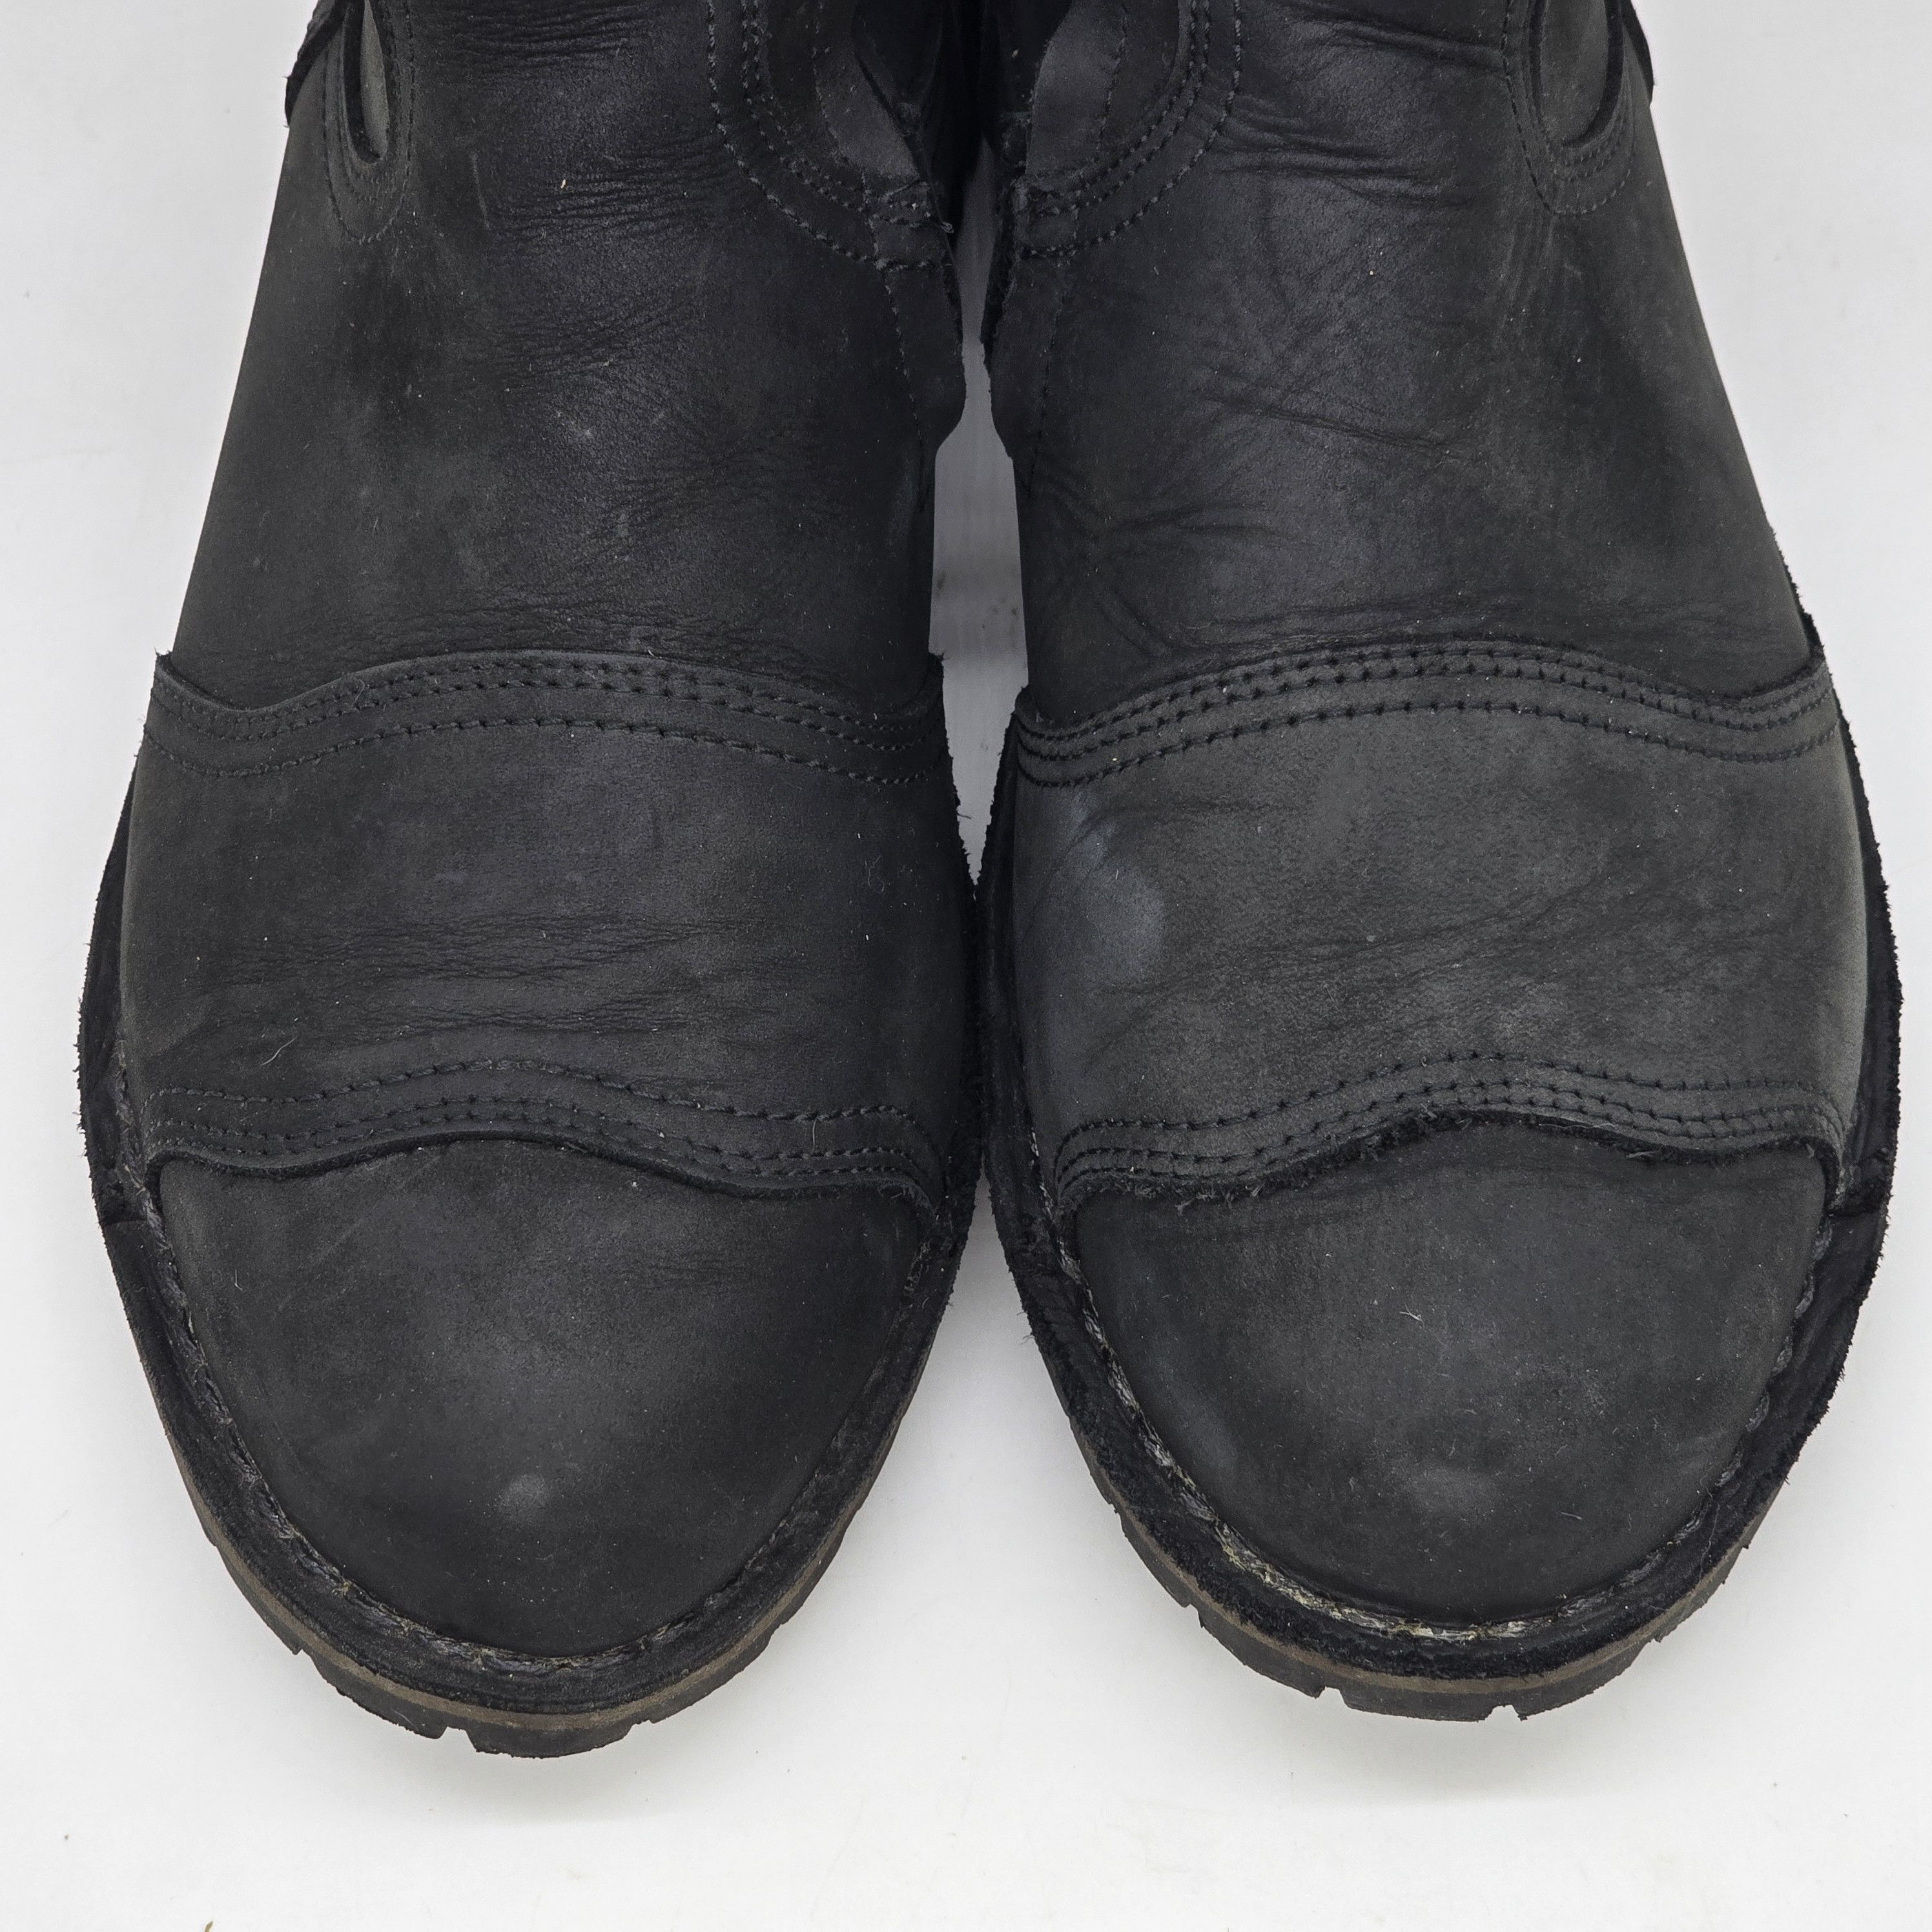 Belstaff - Duration Motorcycle Boots - 4